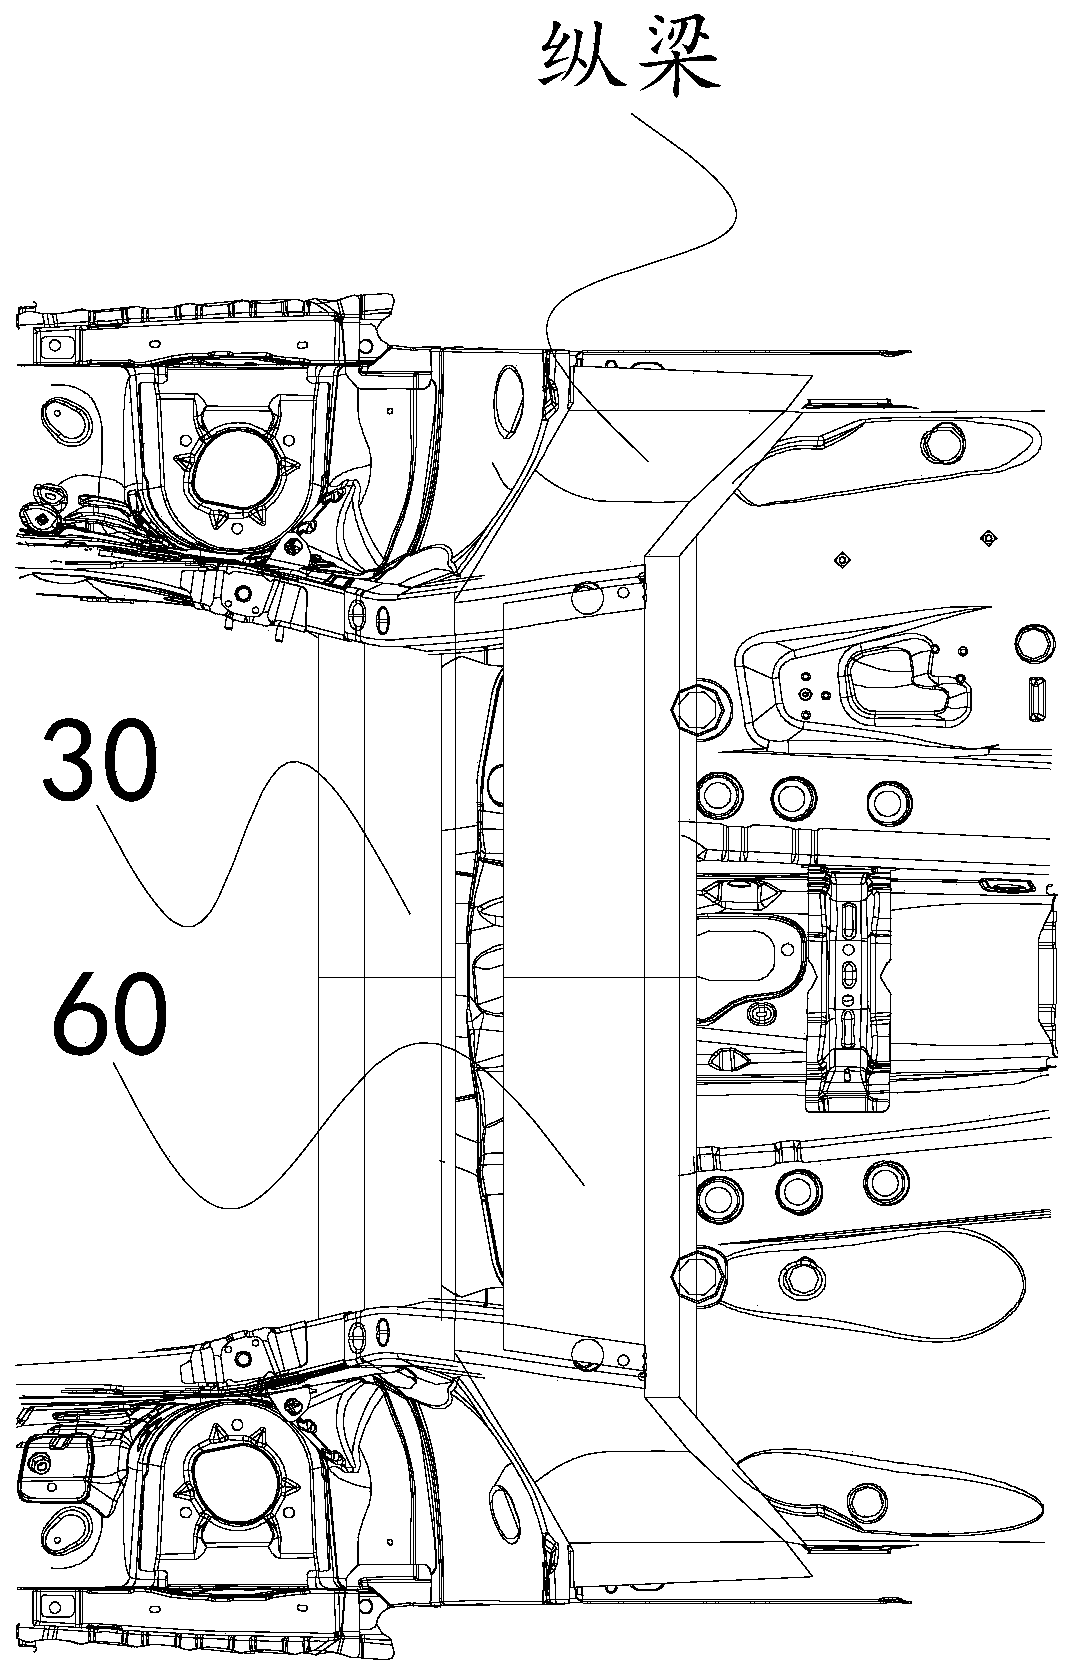 A longitudinal and horizontal beam structure under the electric vehicle body